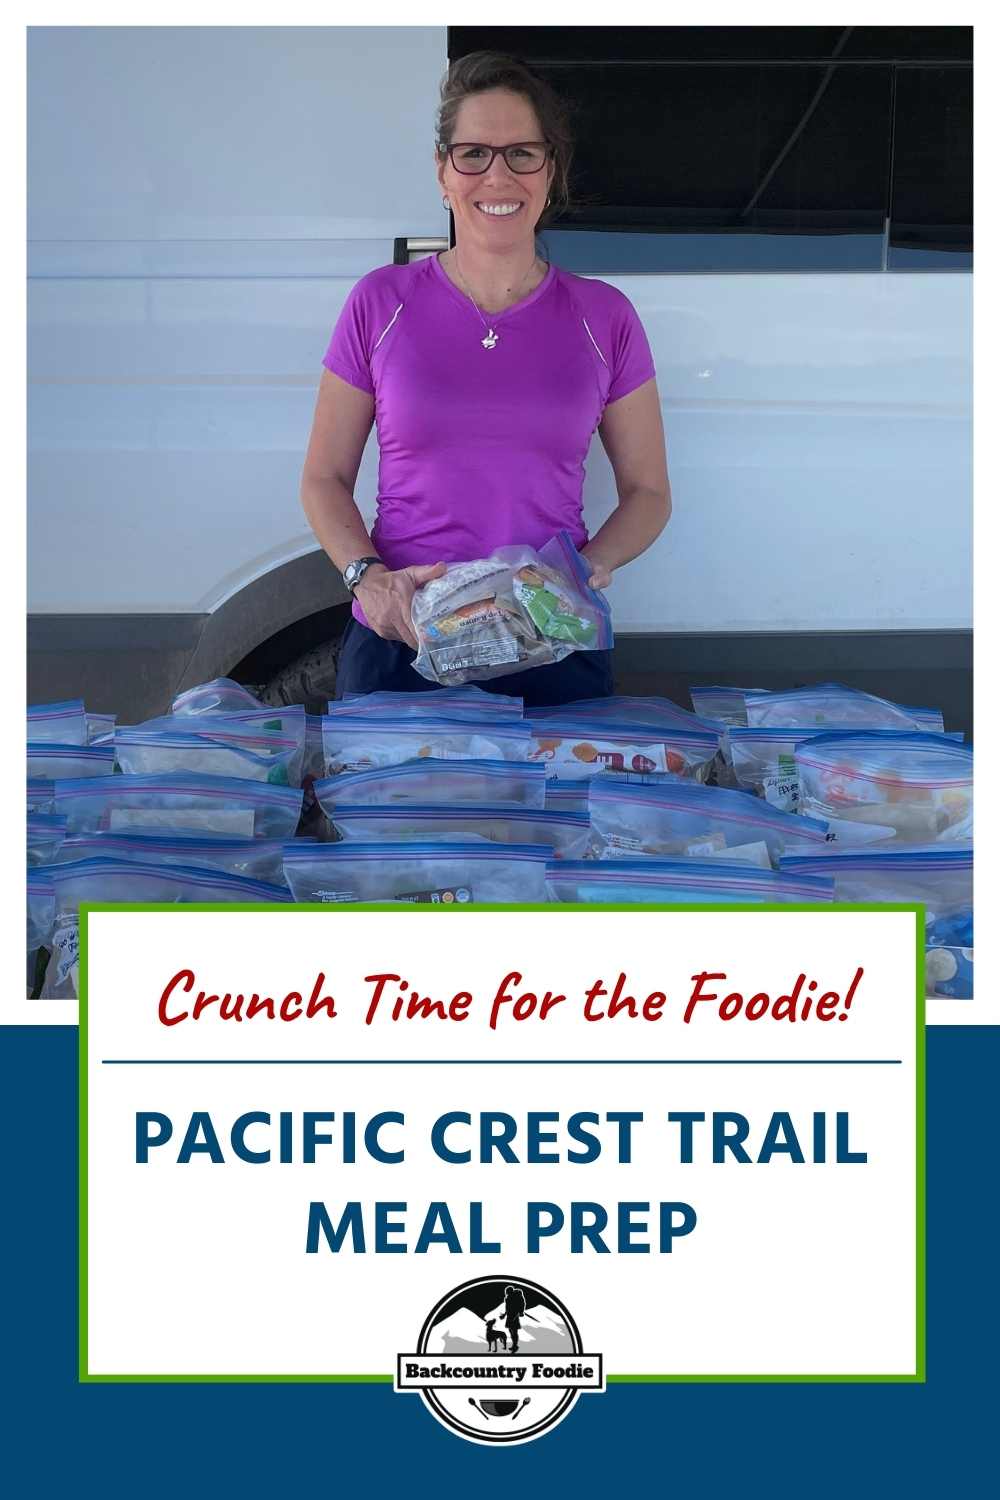 It's crunch time for the Foodie! T-minus 37 days until go time. In this post, I share the DIY ultralight backpacking meals going with me and quick tips for speeding up the meal prep process for my PCT thru-hike attempt. You'll also find my favorite no-cook Chocolate Peanut Butter Shake recipe. #backpackingmeals #hikingfoodideas #backpackingfoodideas #nocookbackpackingfood #backpackingrecipes #backcountryfoodie #ultralightbackpacking